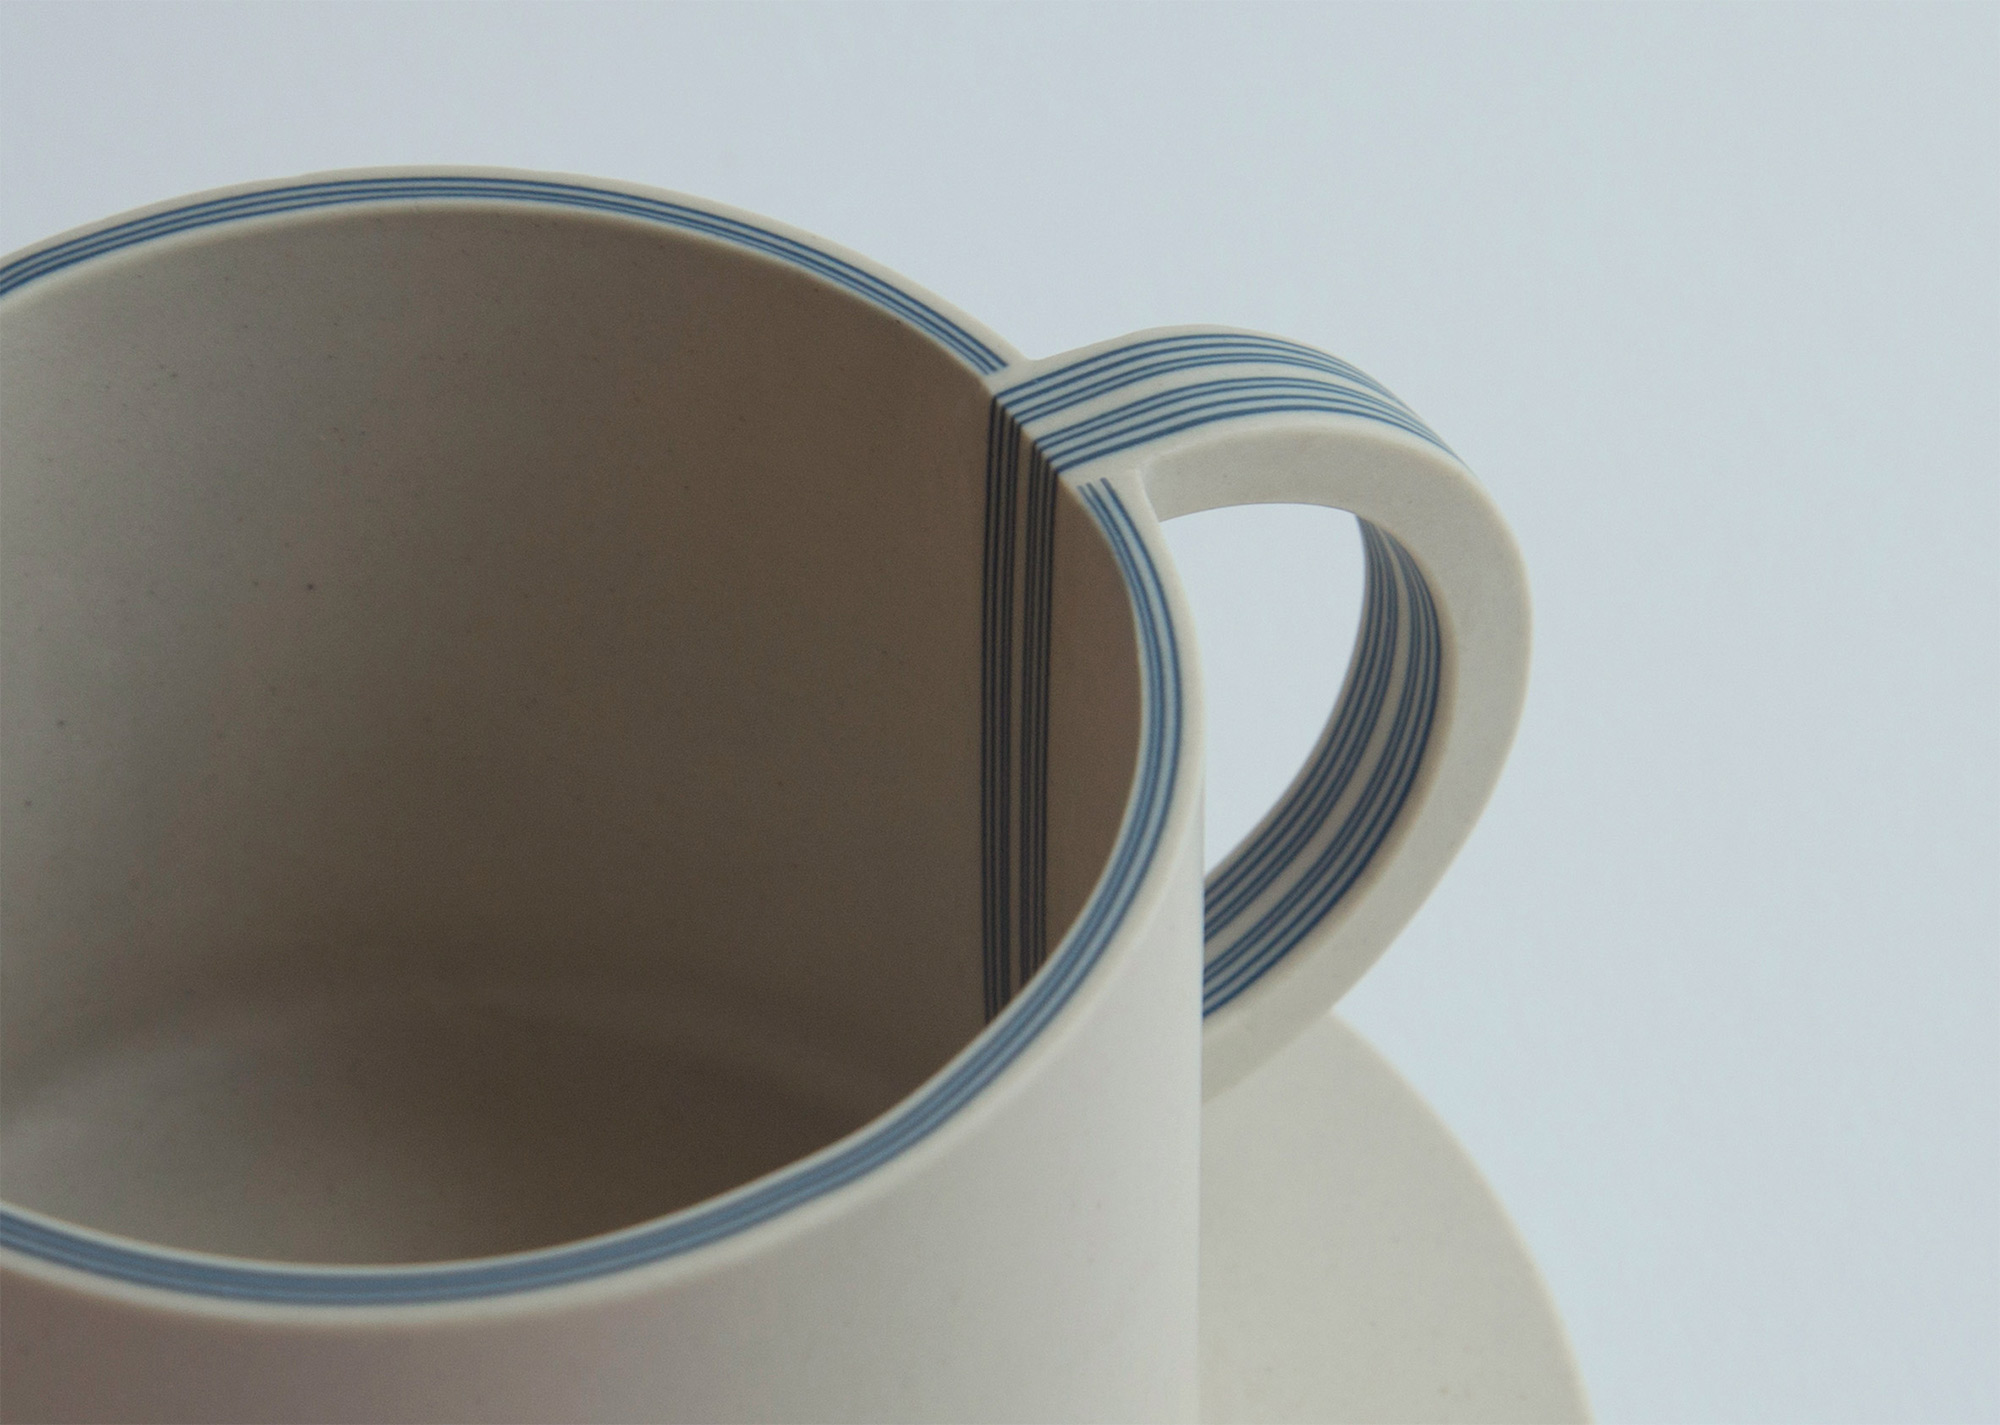 Up To 29 Porcelain Layers Molded into Elegant Tableware by Yuting Chang